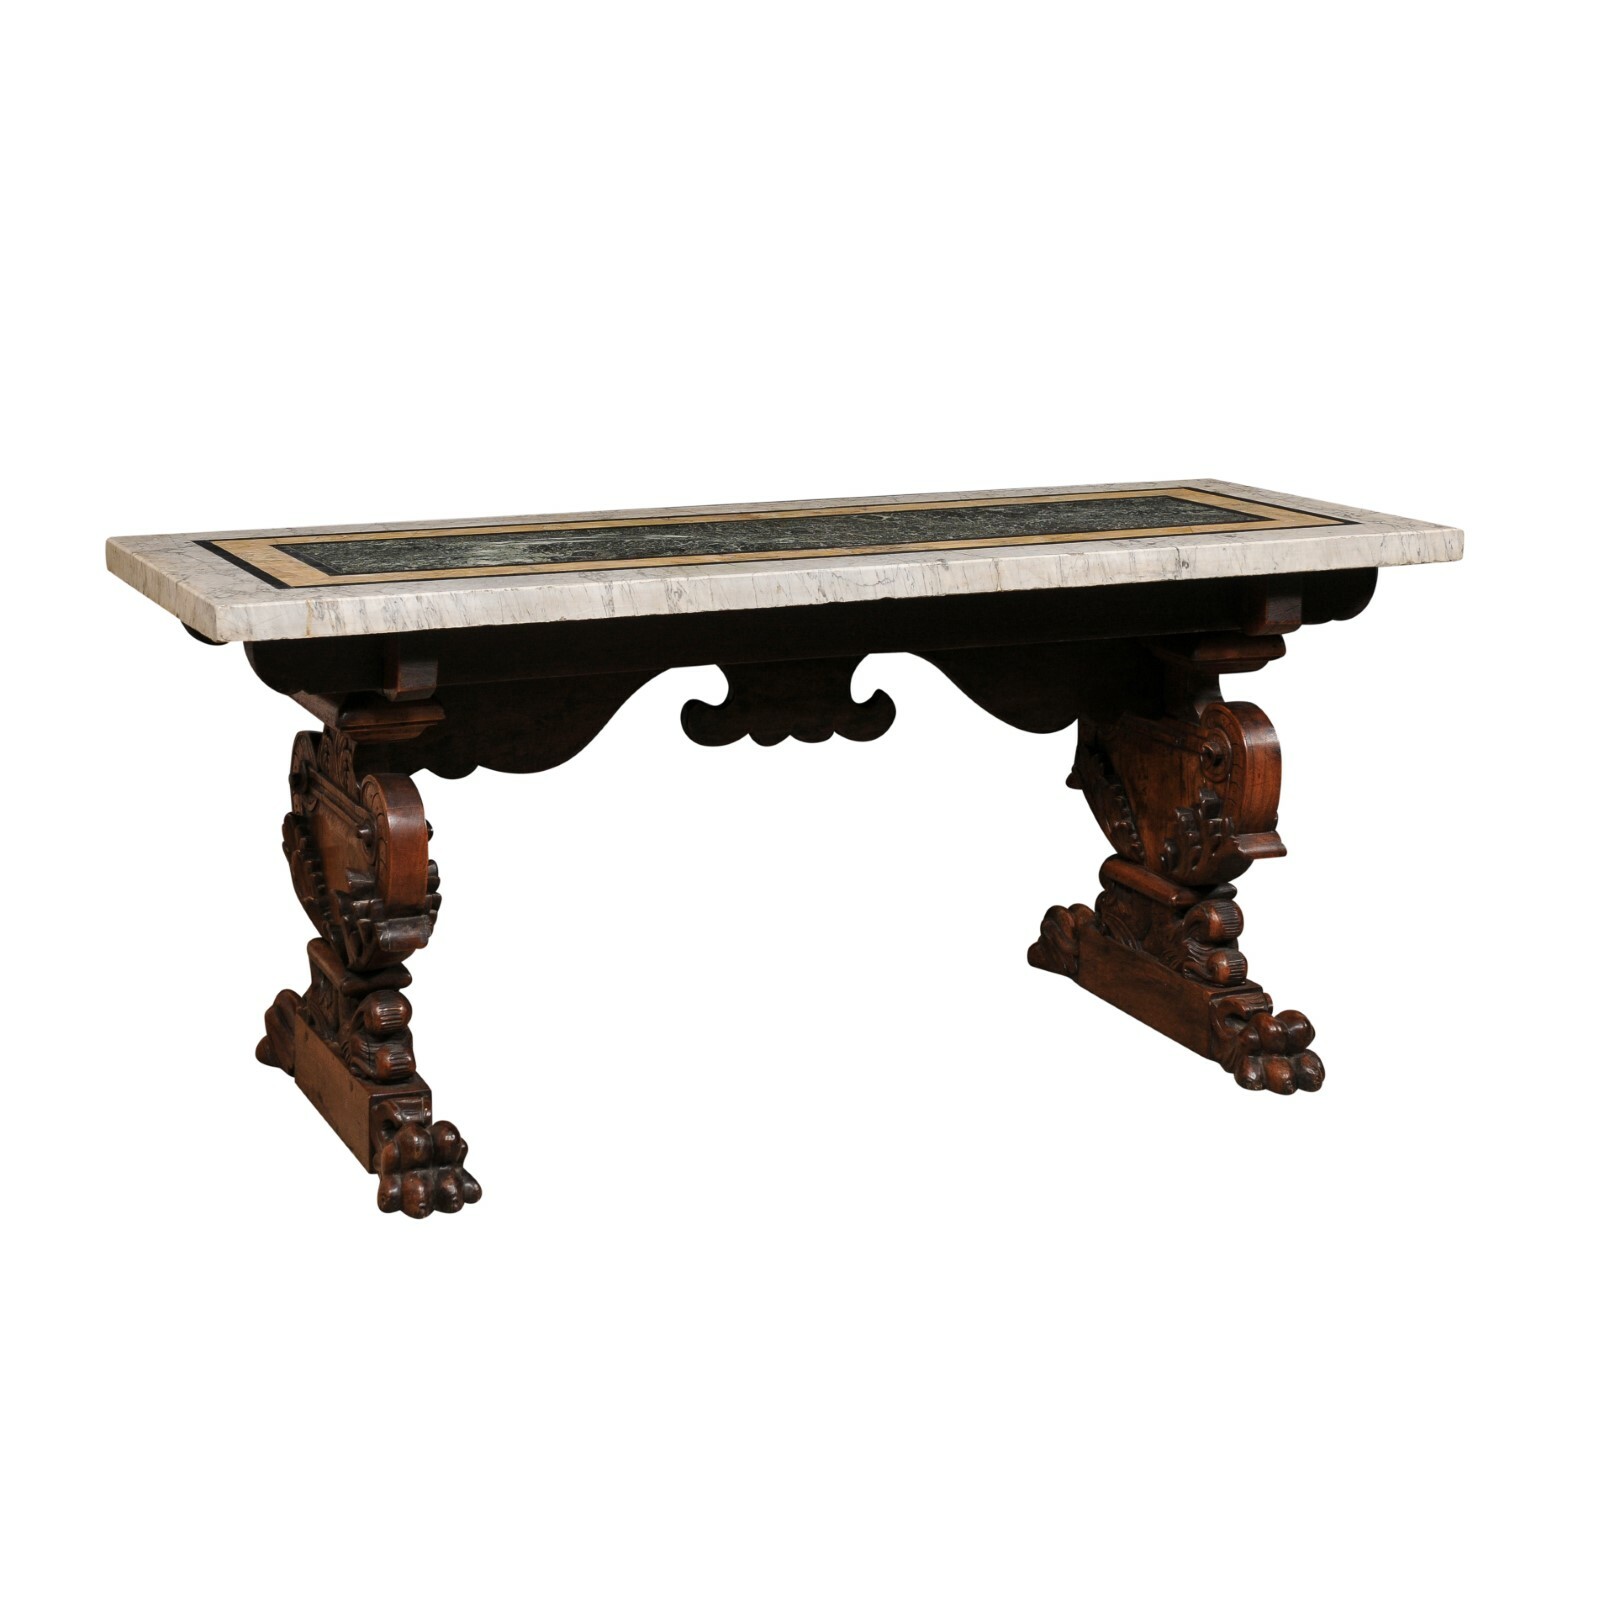 A Gorgeous 18th C. Italian Marble Top Table